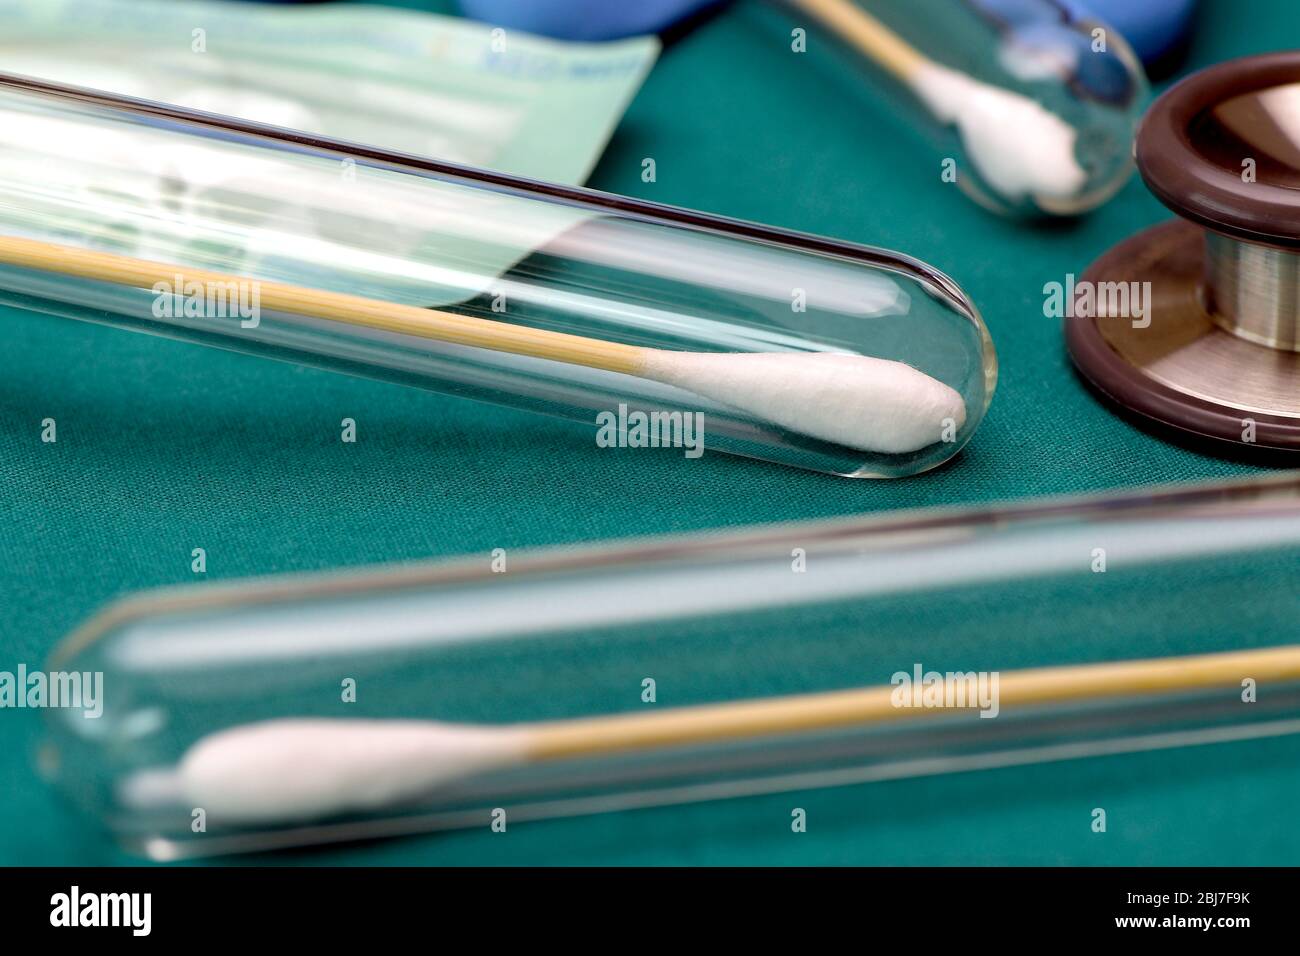 Most tests for the new strain of coronavirus involve taking a swab sample for analysis. Stock Photo